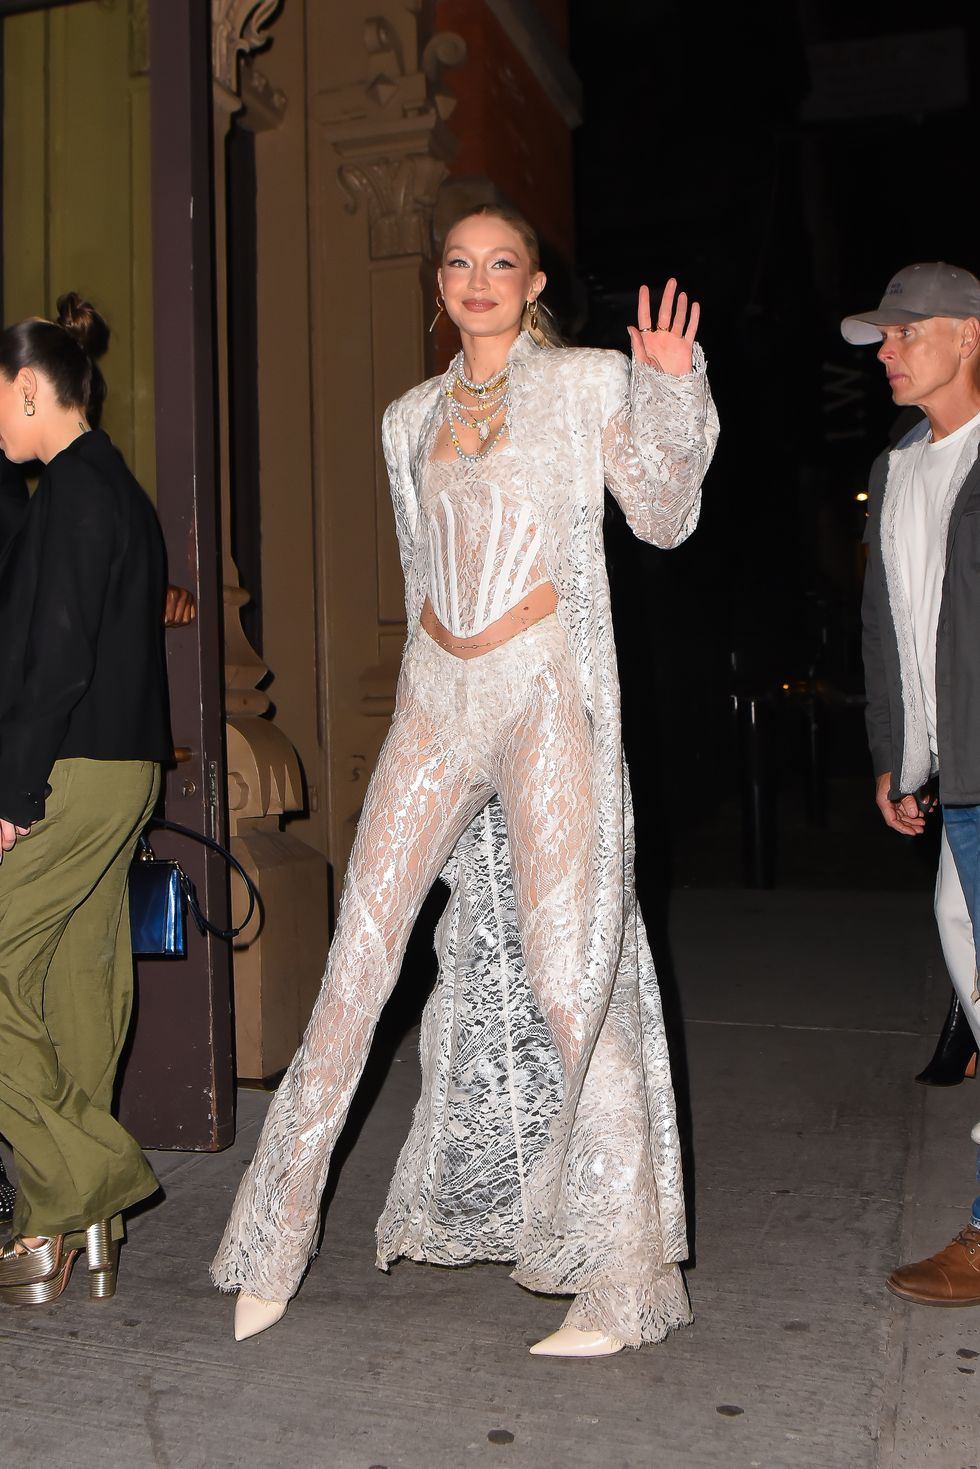 What guests like Blake Lively wore to Gigi Hadid's birthday party